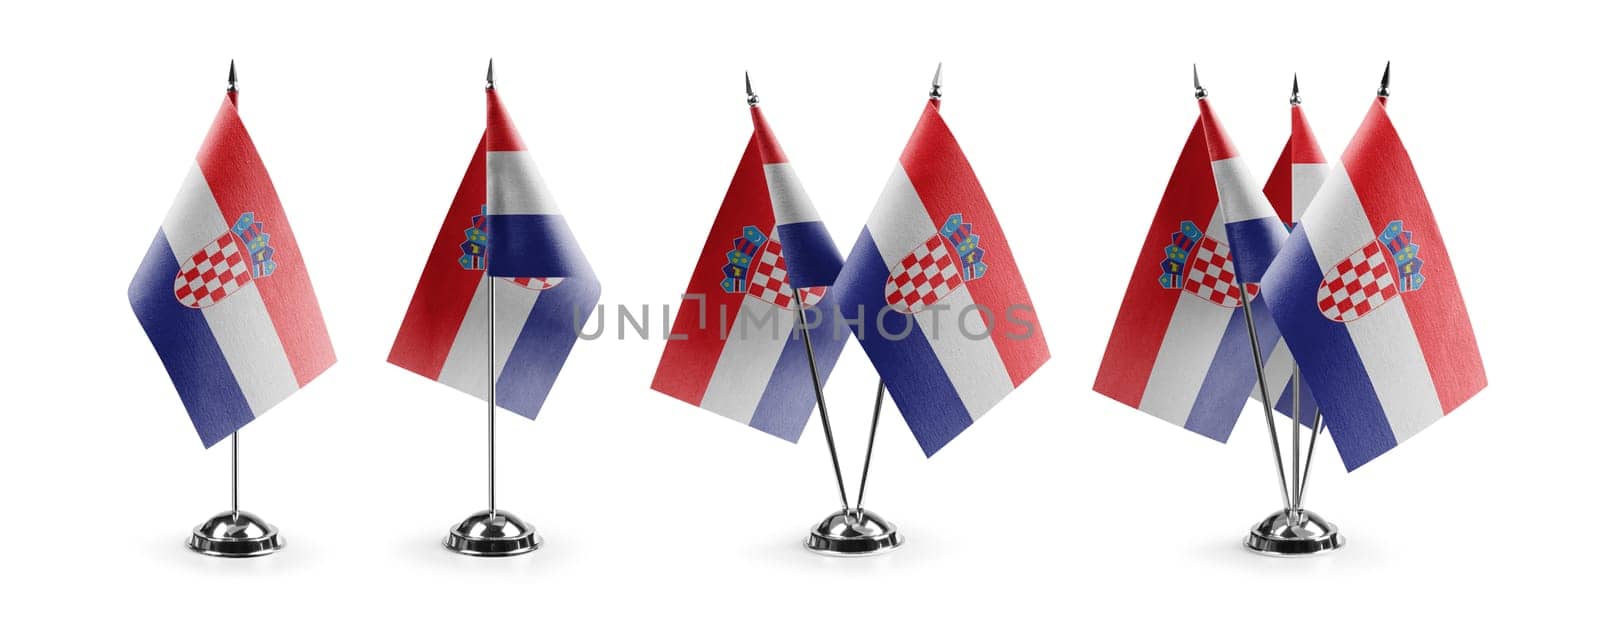 Small national flags of the Croatia on a white background.